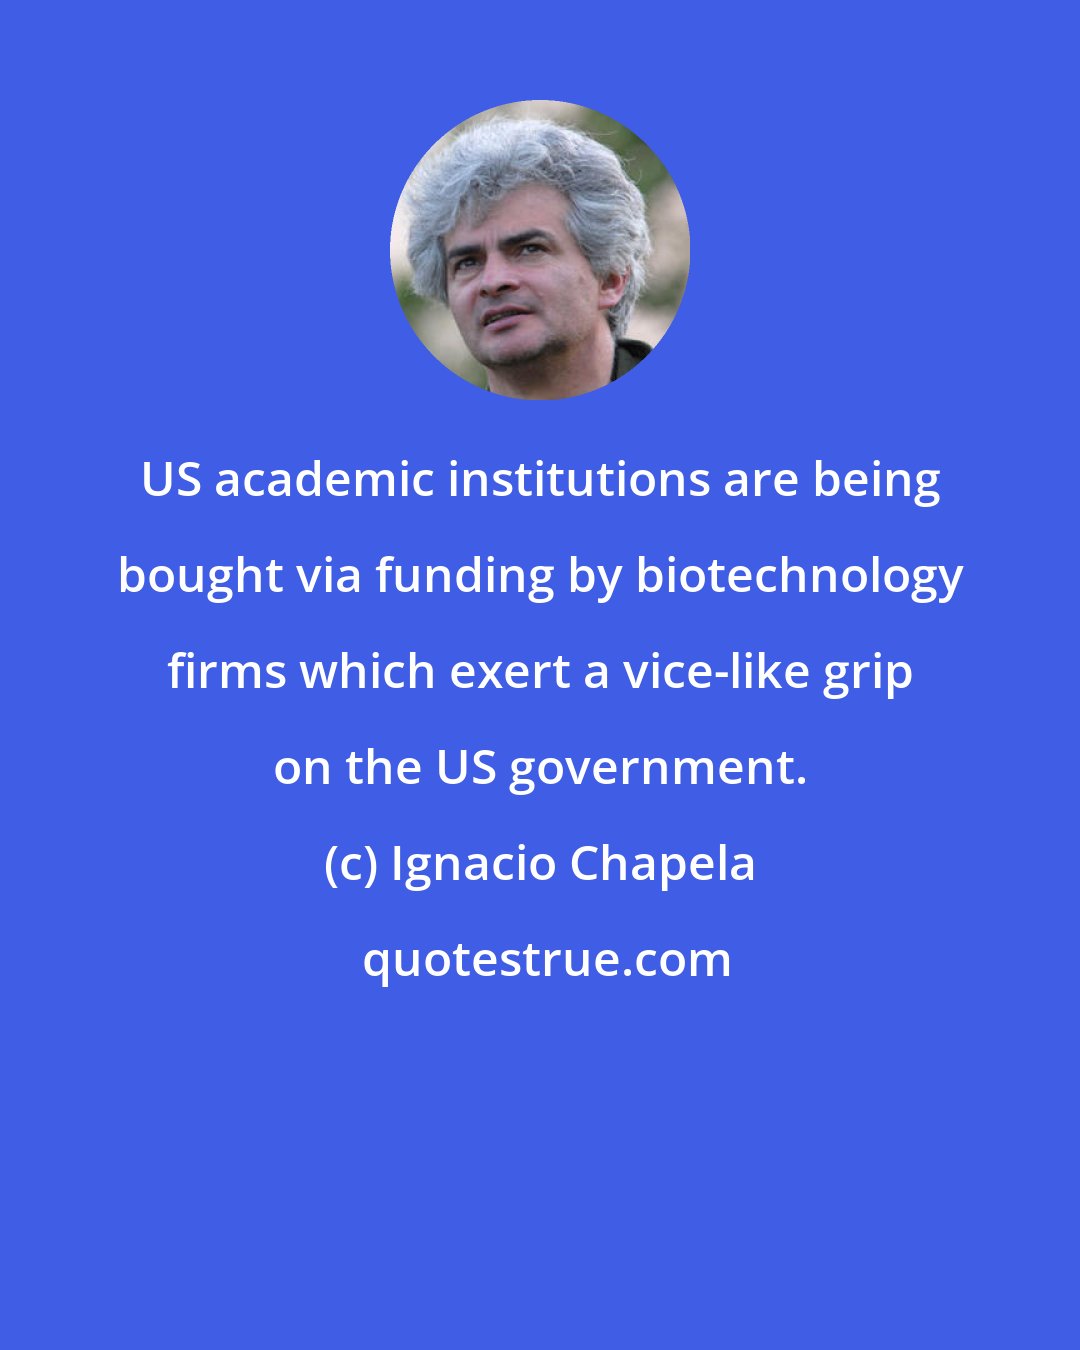 Ignacio Chapela: US academic institutions are being bought via funding by biotechnology firms which exert a vice-like grip on the US government.